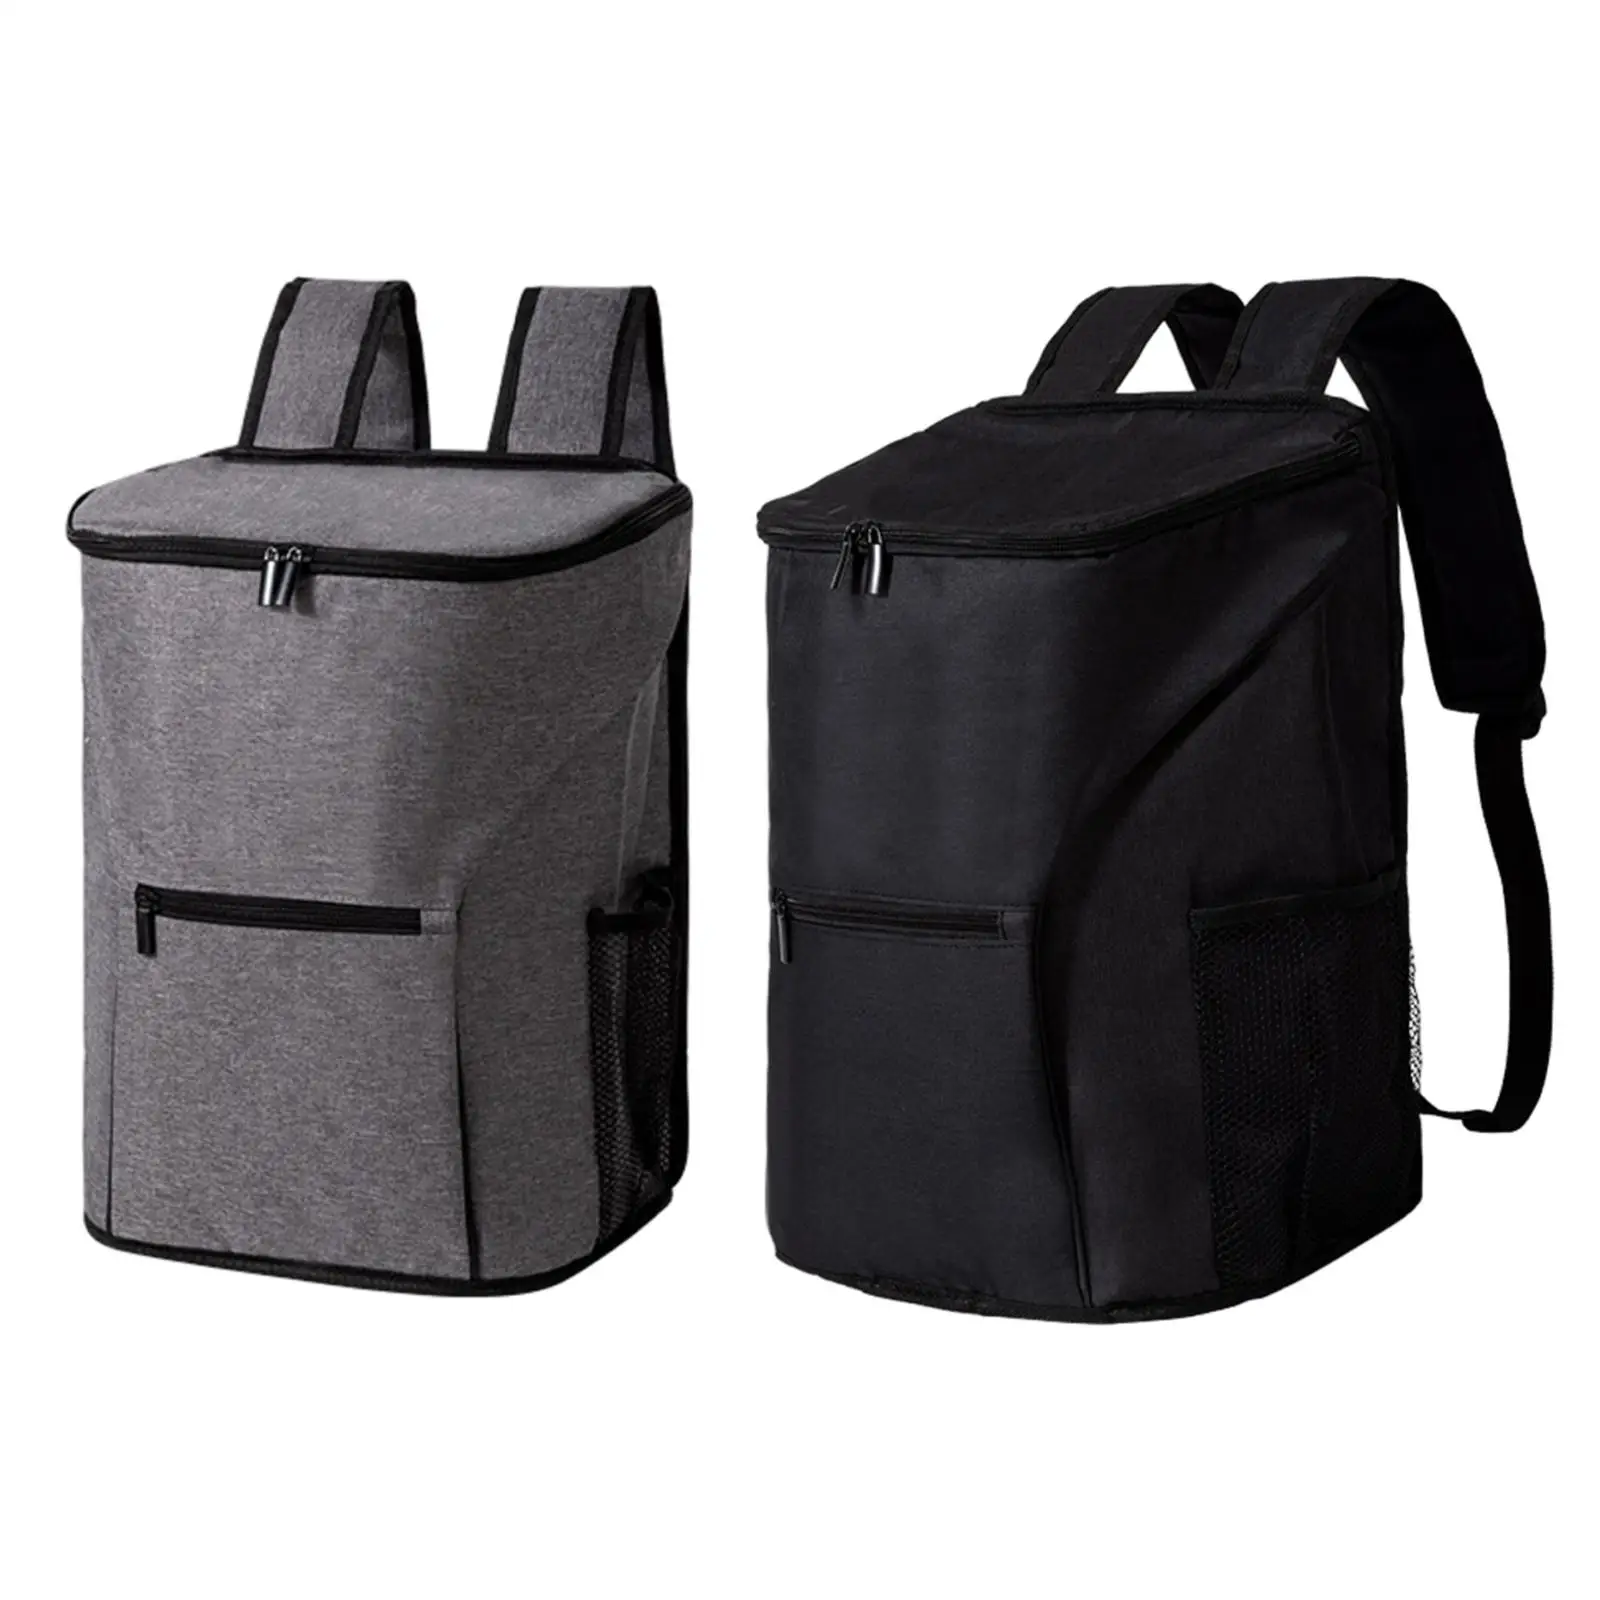 Cooler Bag Insulated Backpack Cooler Multifunctional Zipper Men Women Thermal Backpack for Picnic Hiking Fishing Camping Beach